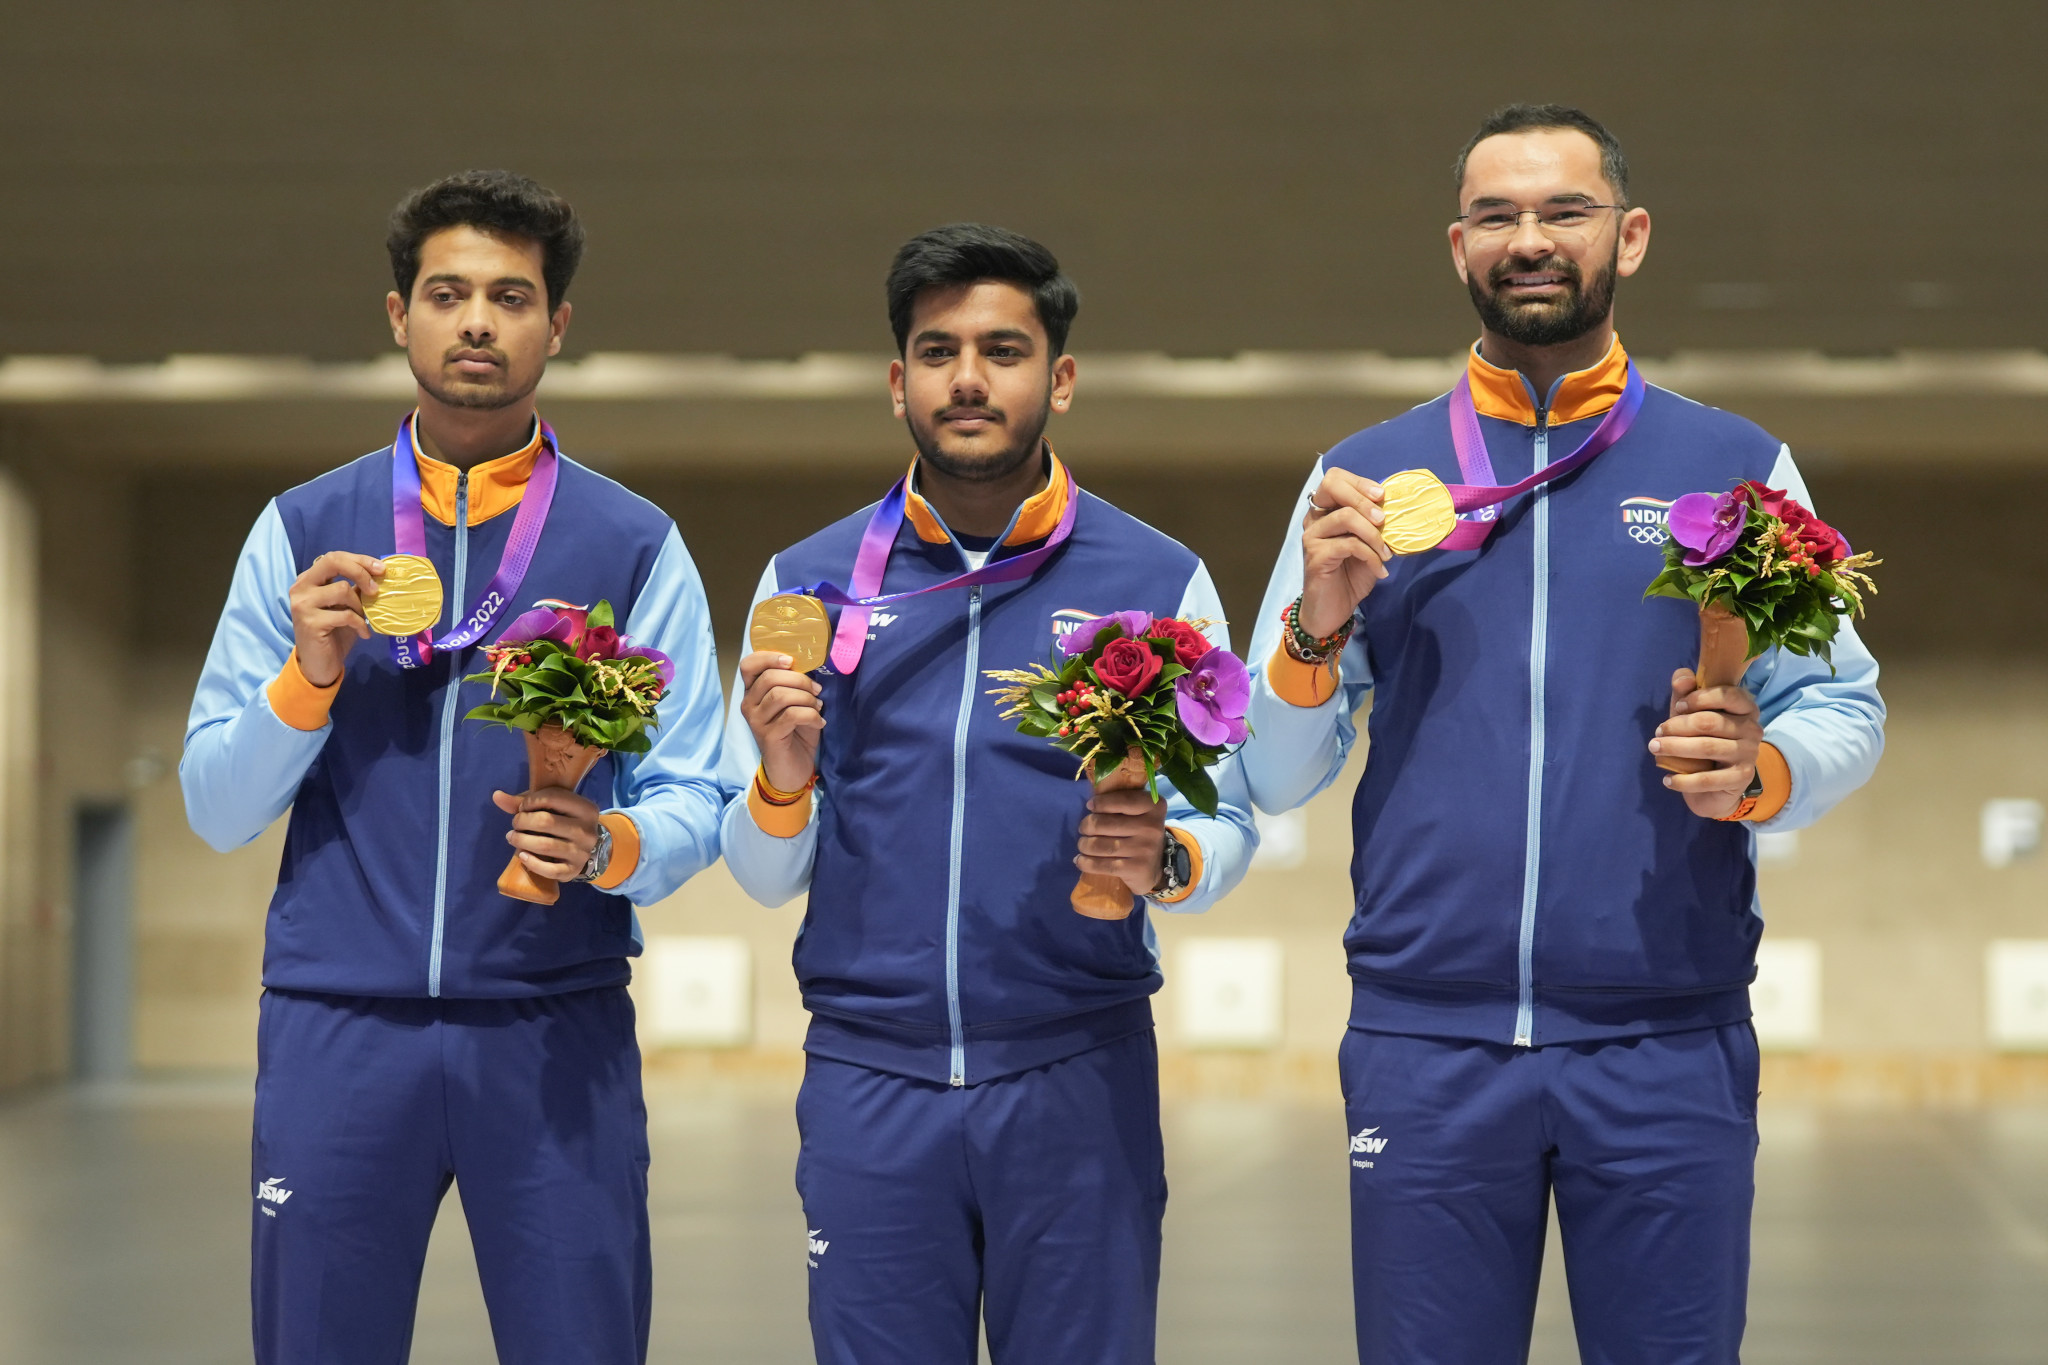 India set a new men's team 50m rifle three positions record with a score of 1,769, beating their former best by eight points ©Hangzhou 2022